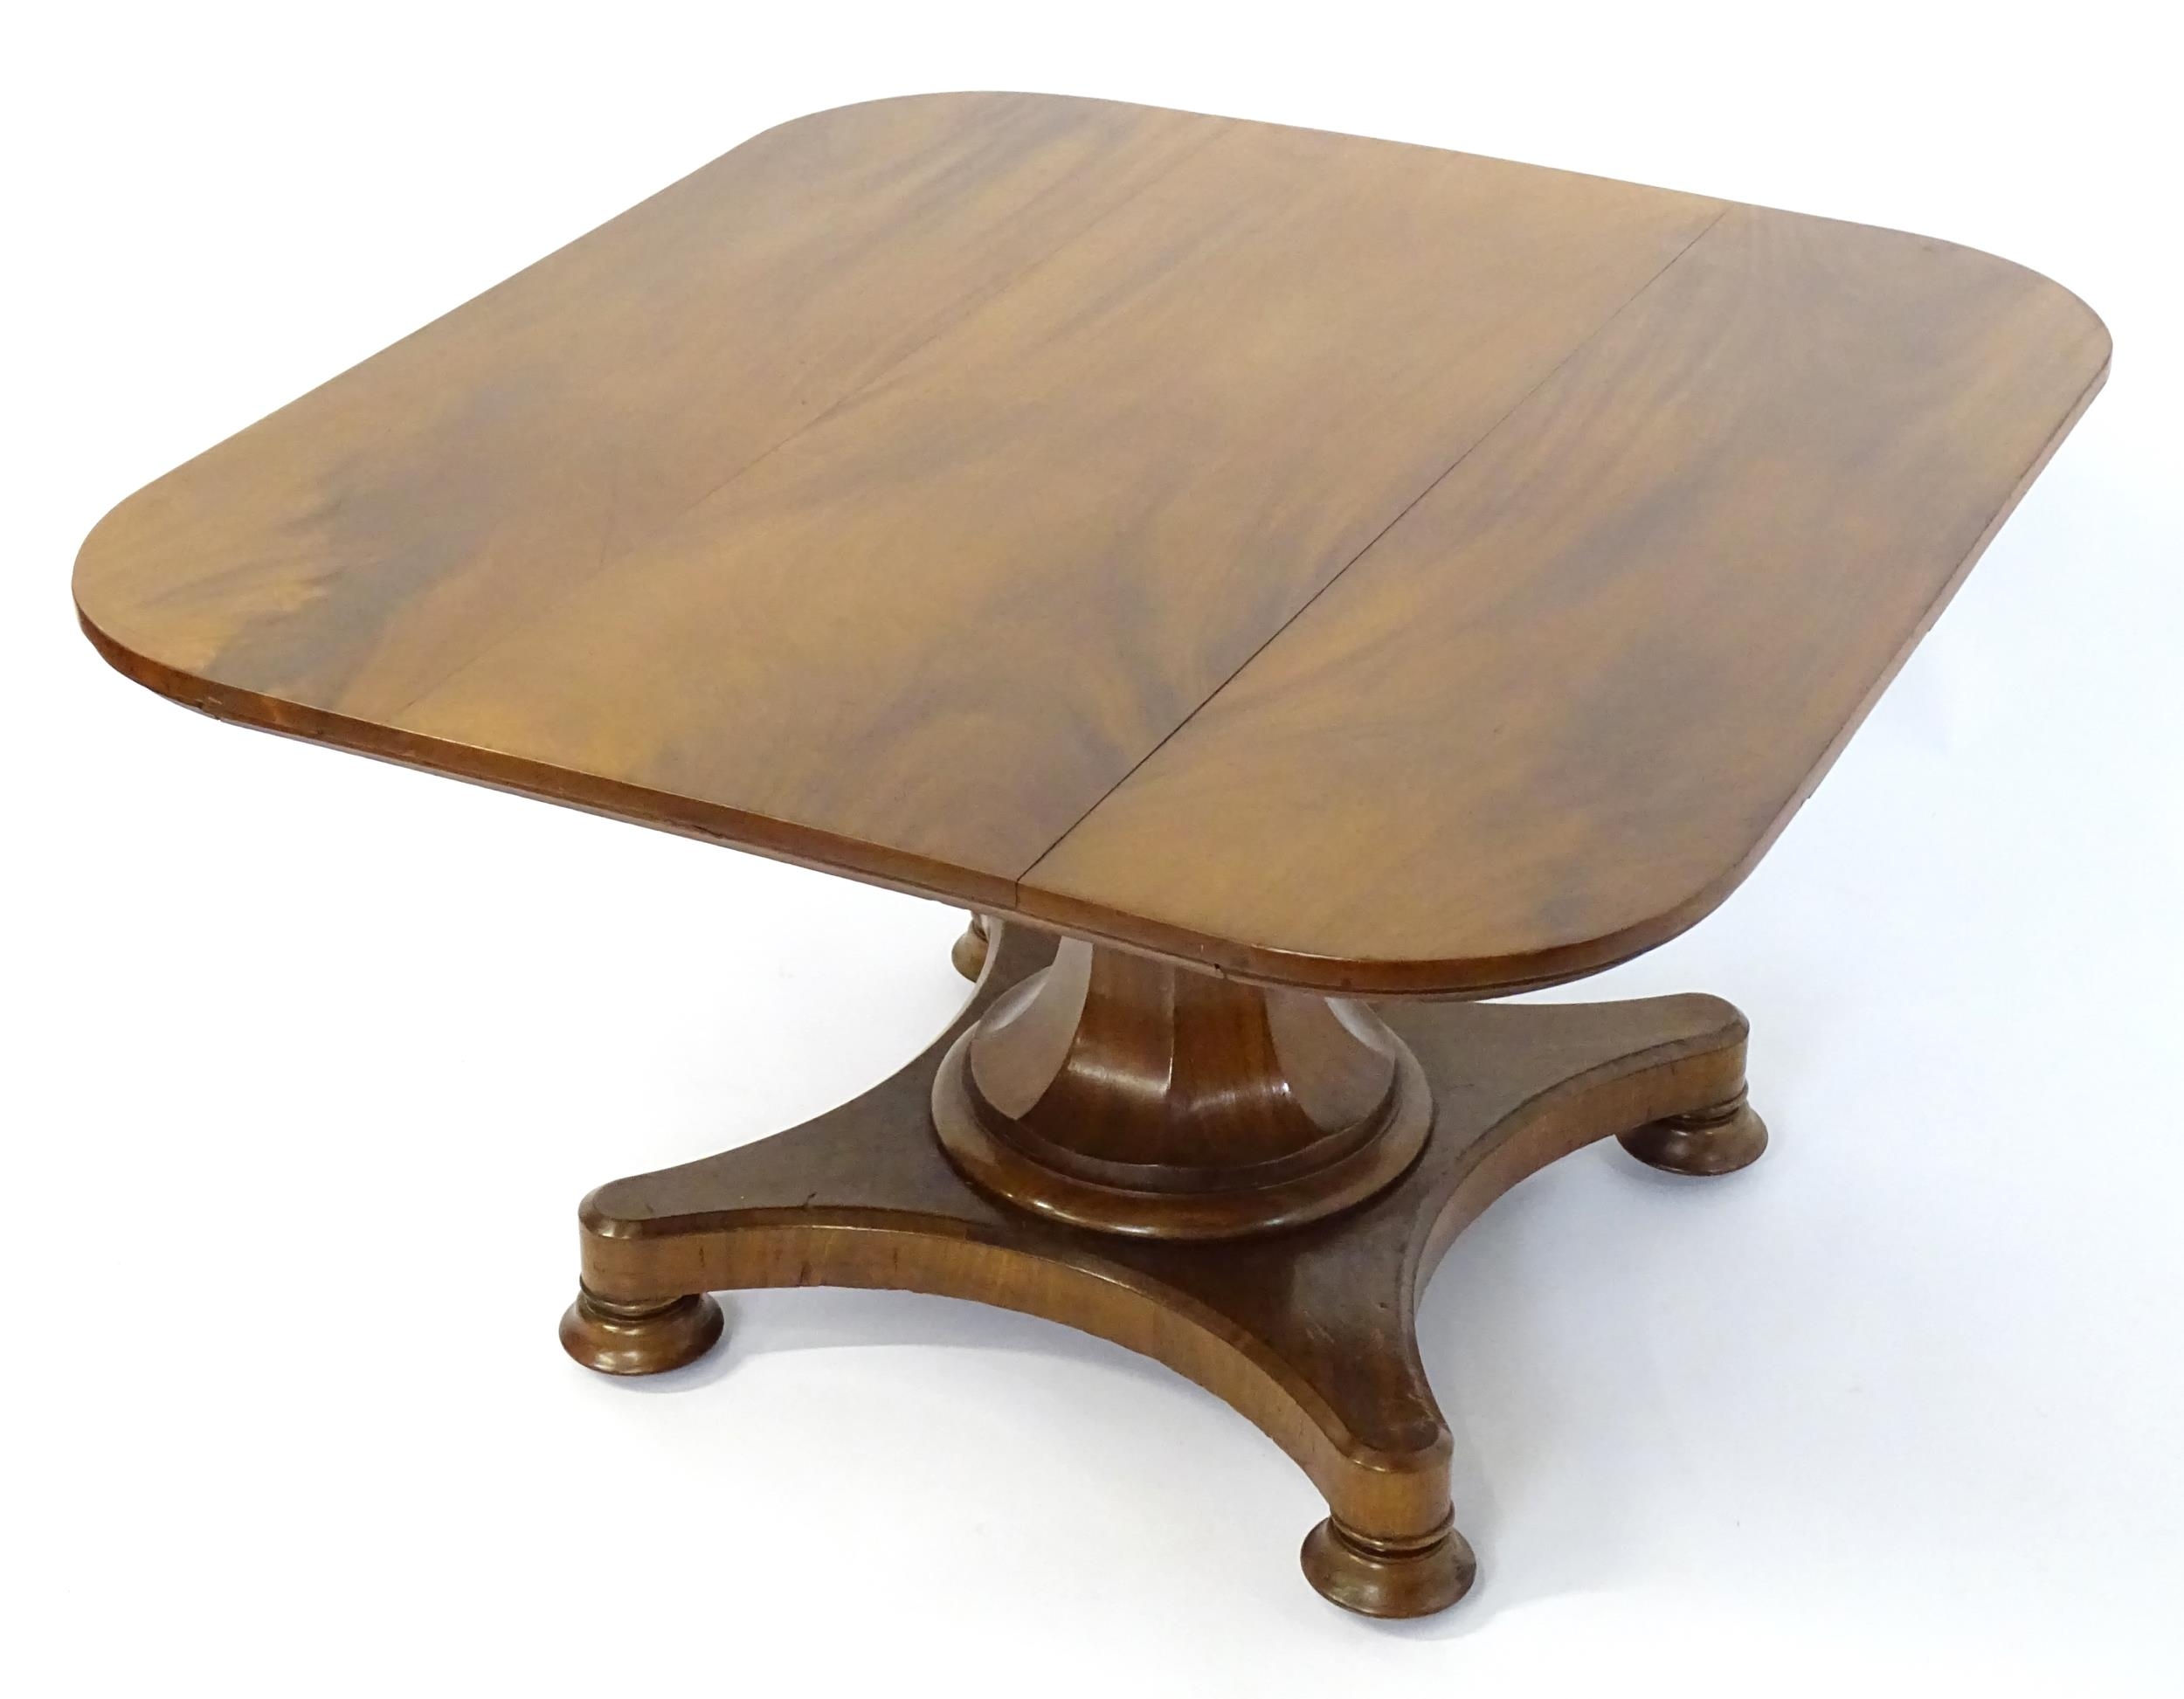 A Victorian mahogany tilt top table with rounded edges and standing on a pedestal base with - Image 6 of 8